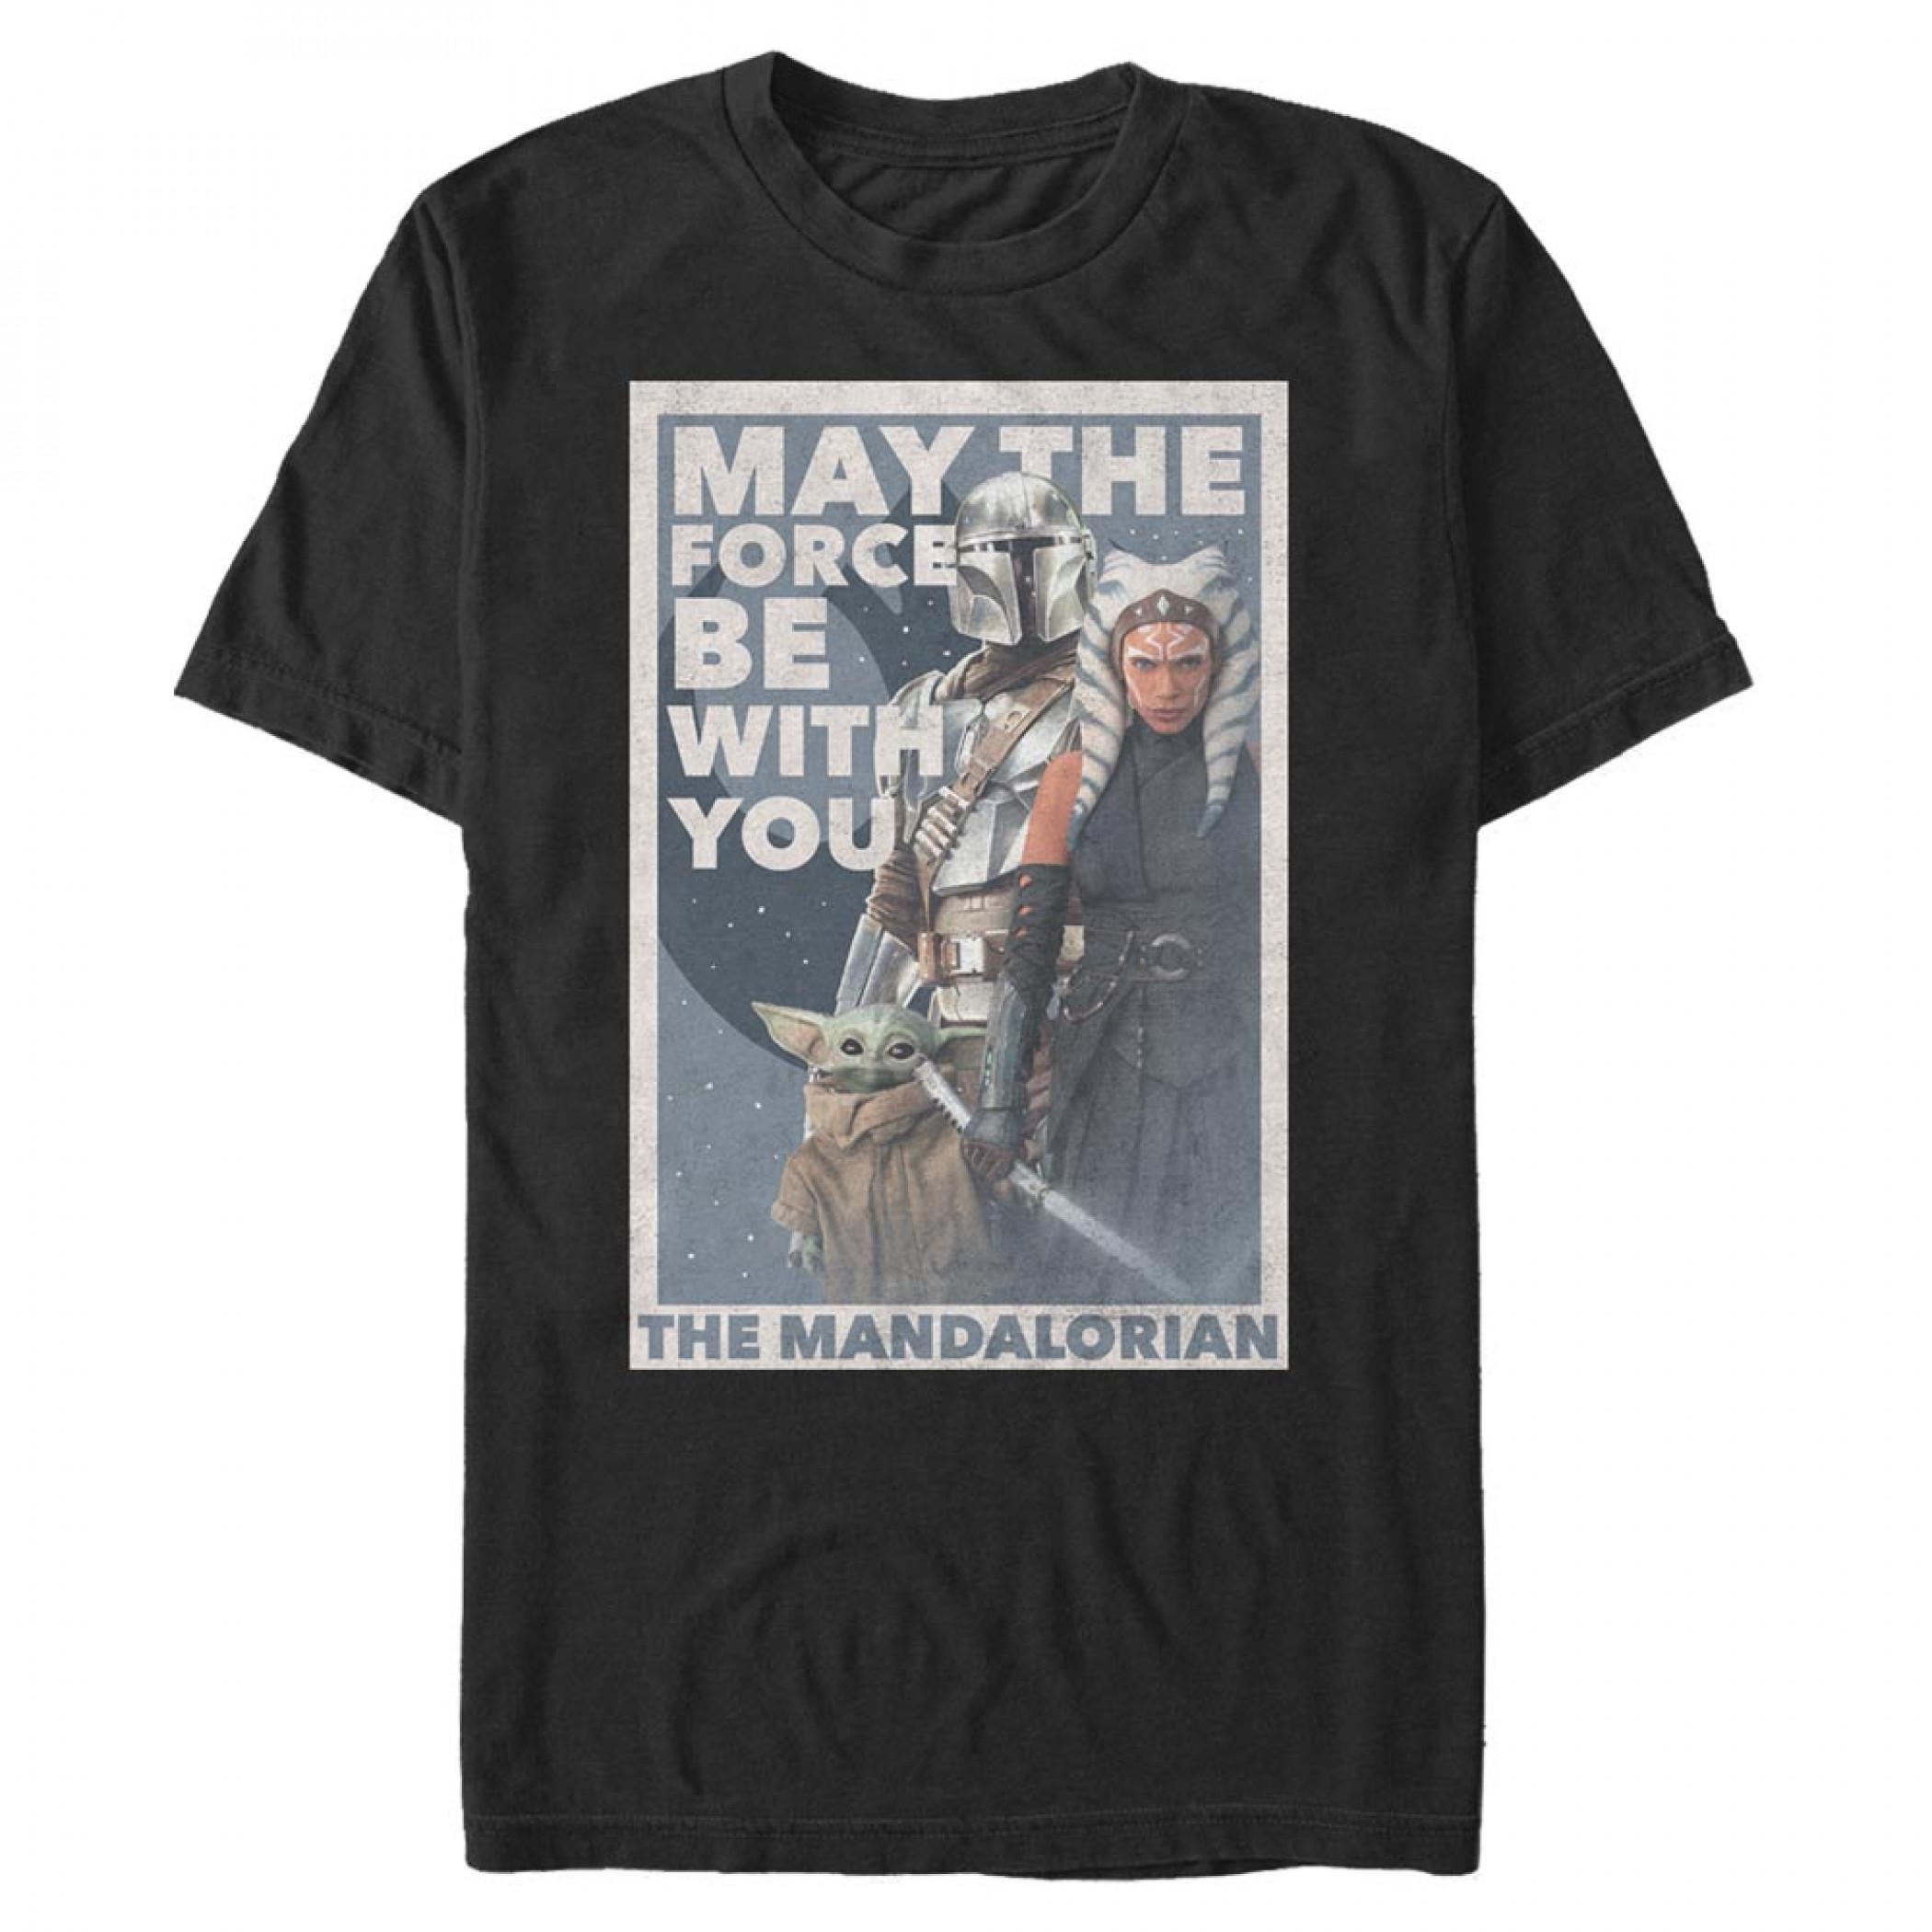 The Mandalorian May The Force Be With You T-Shirt